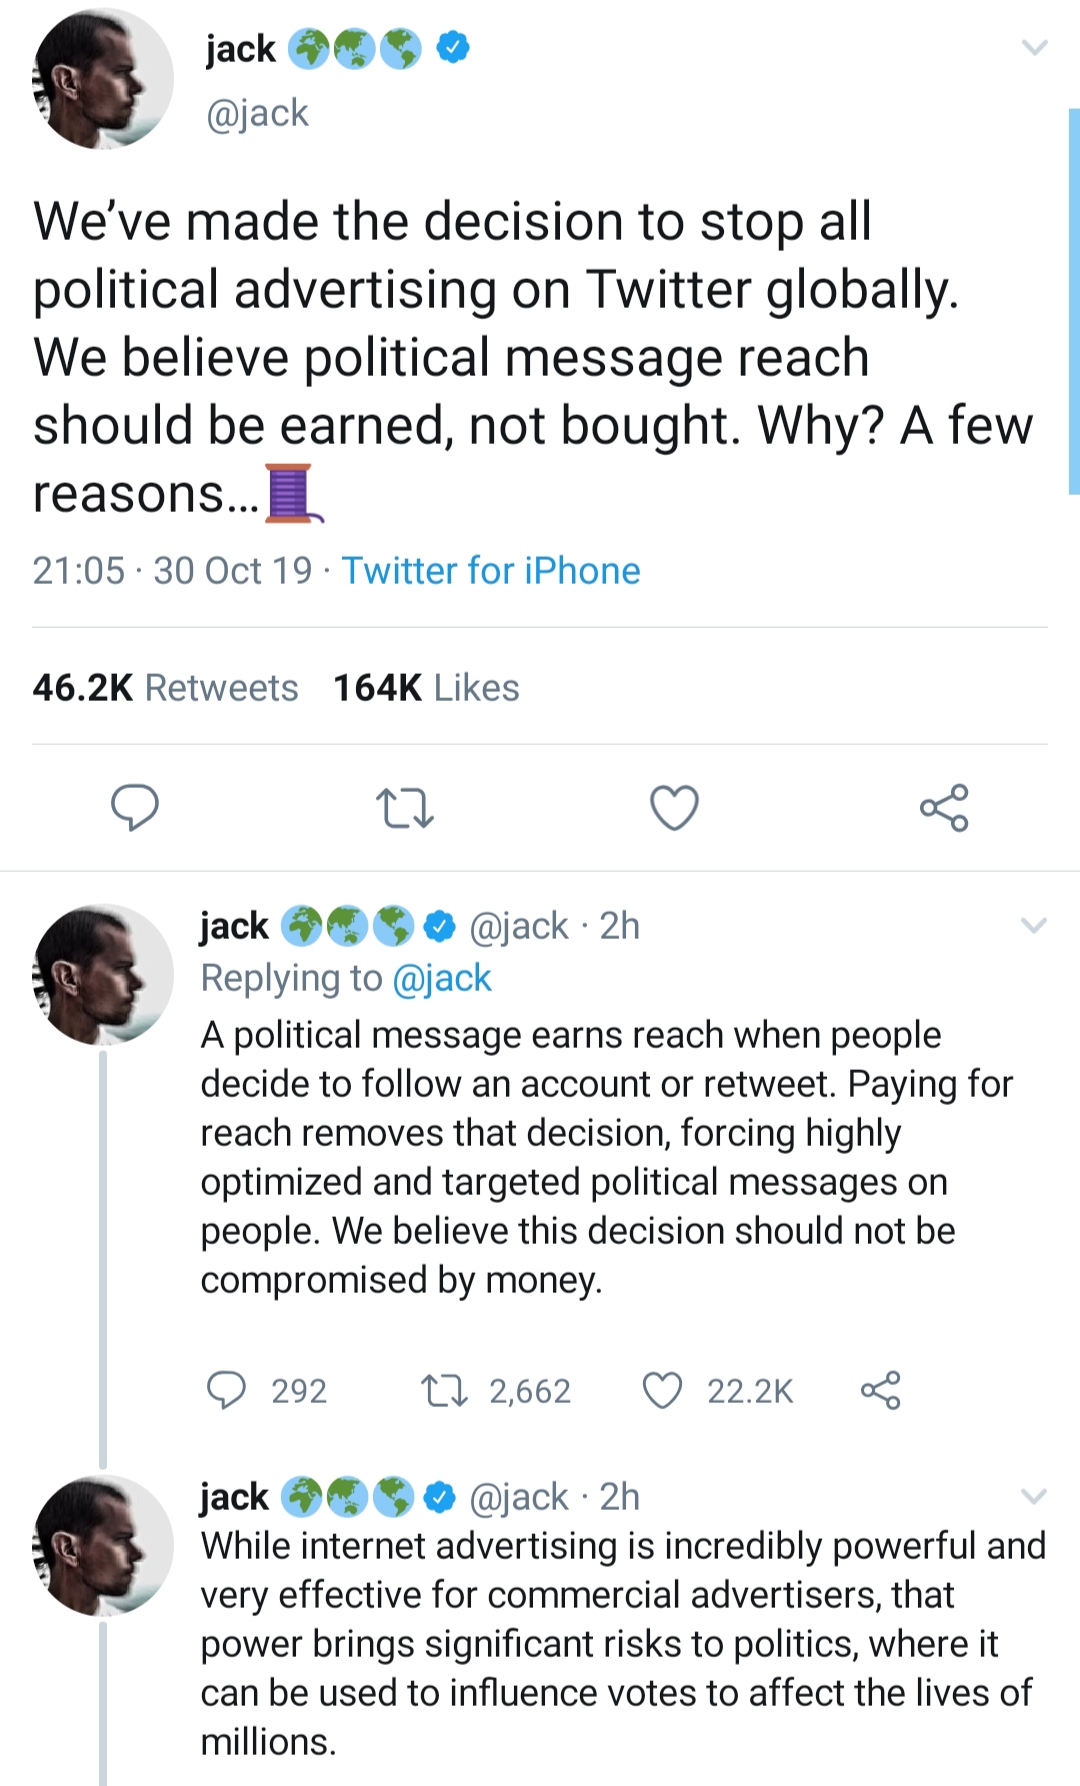 twitter-ban-political-adverts-ceo-jack-dorsey